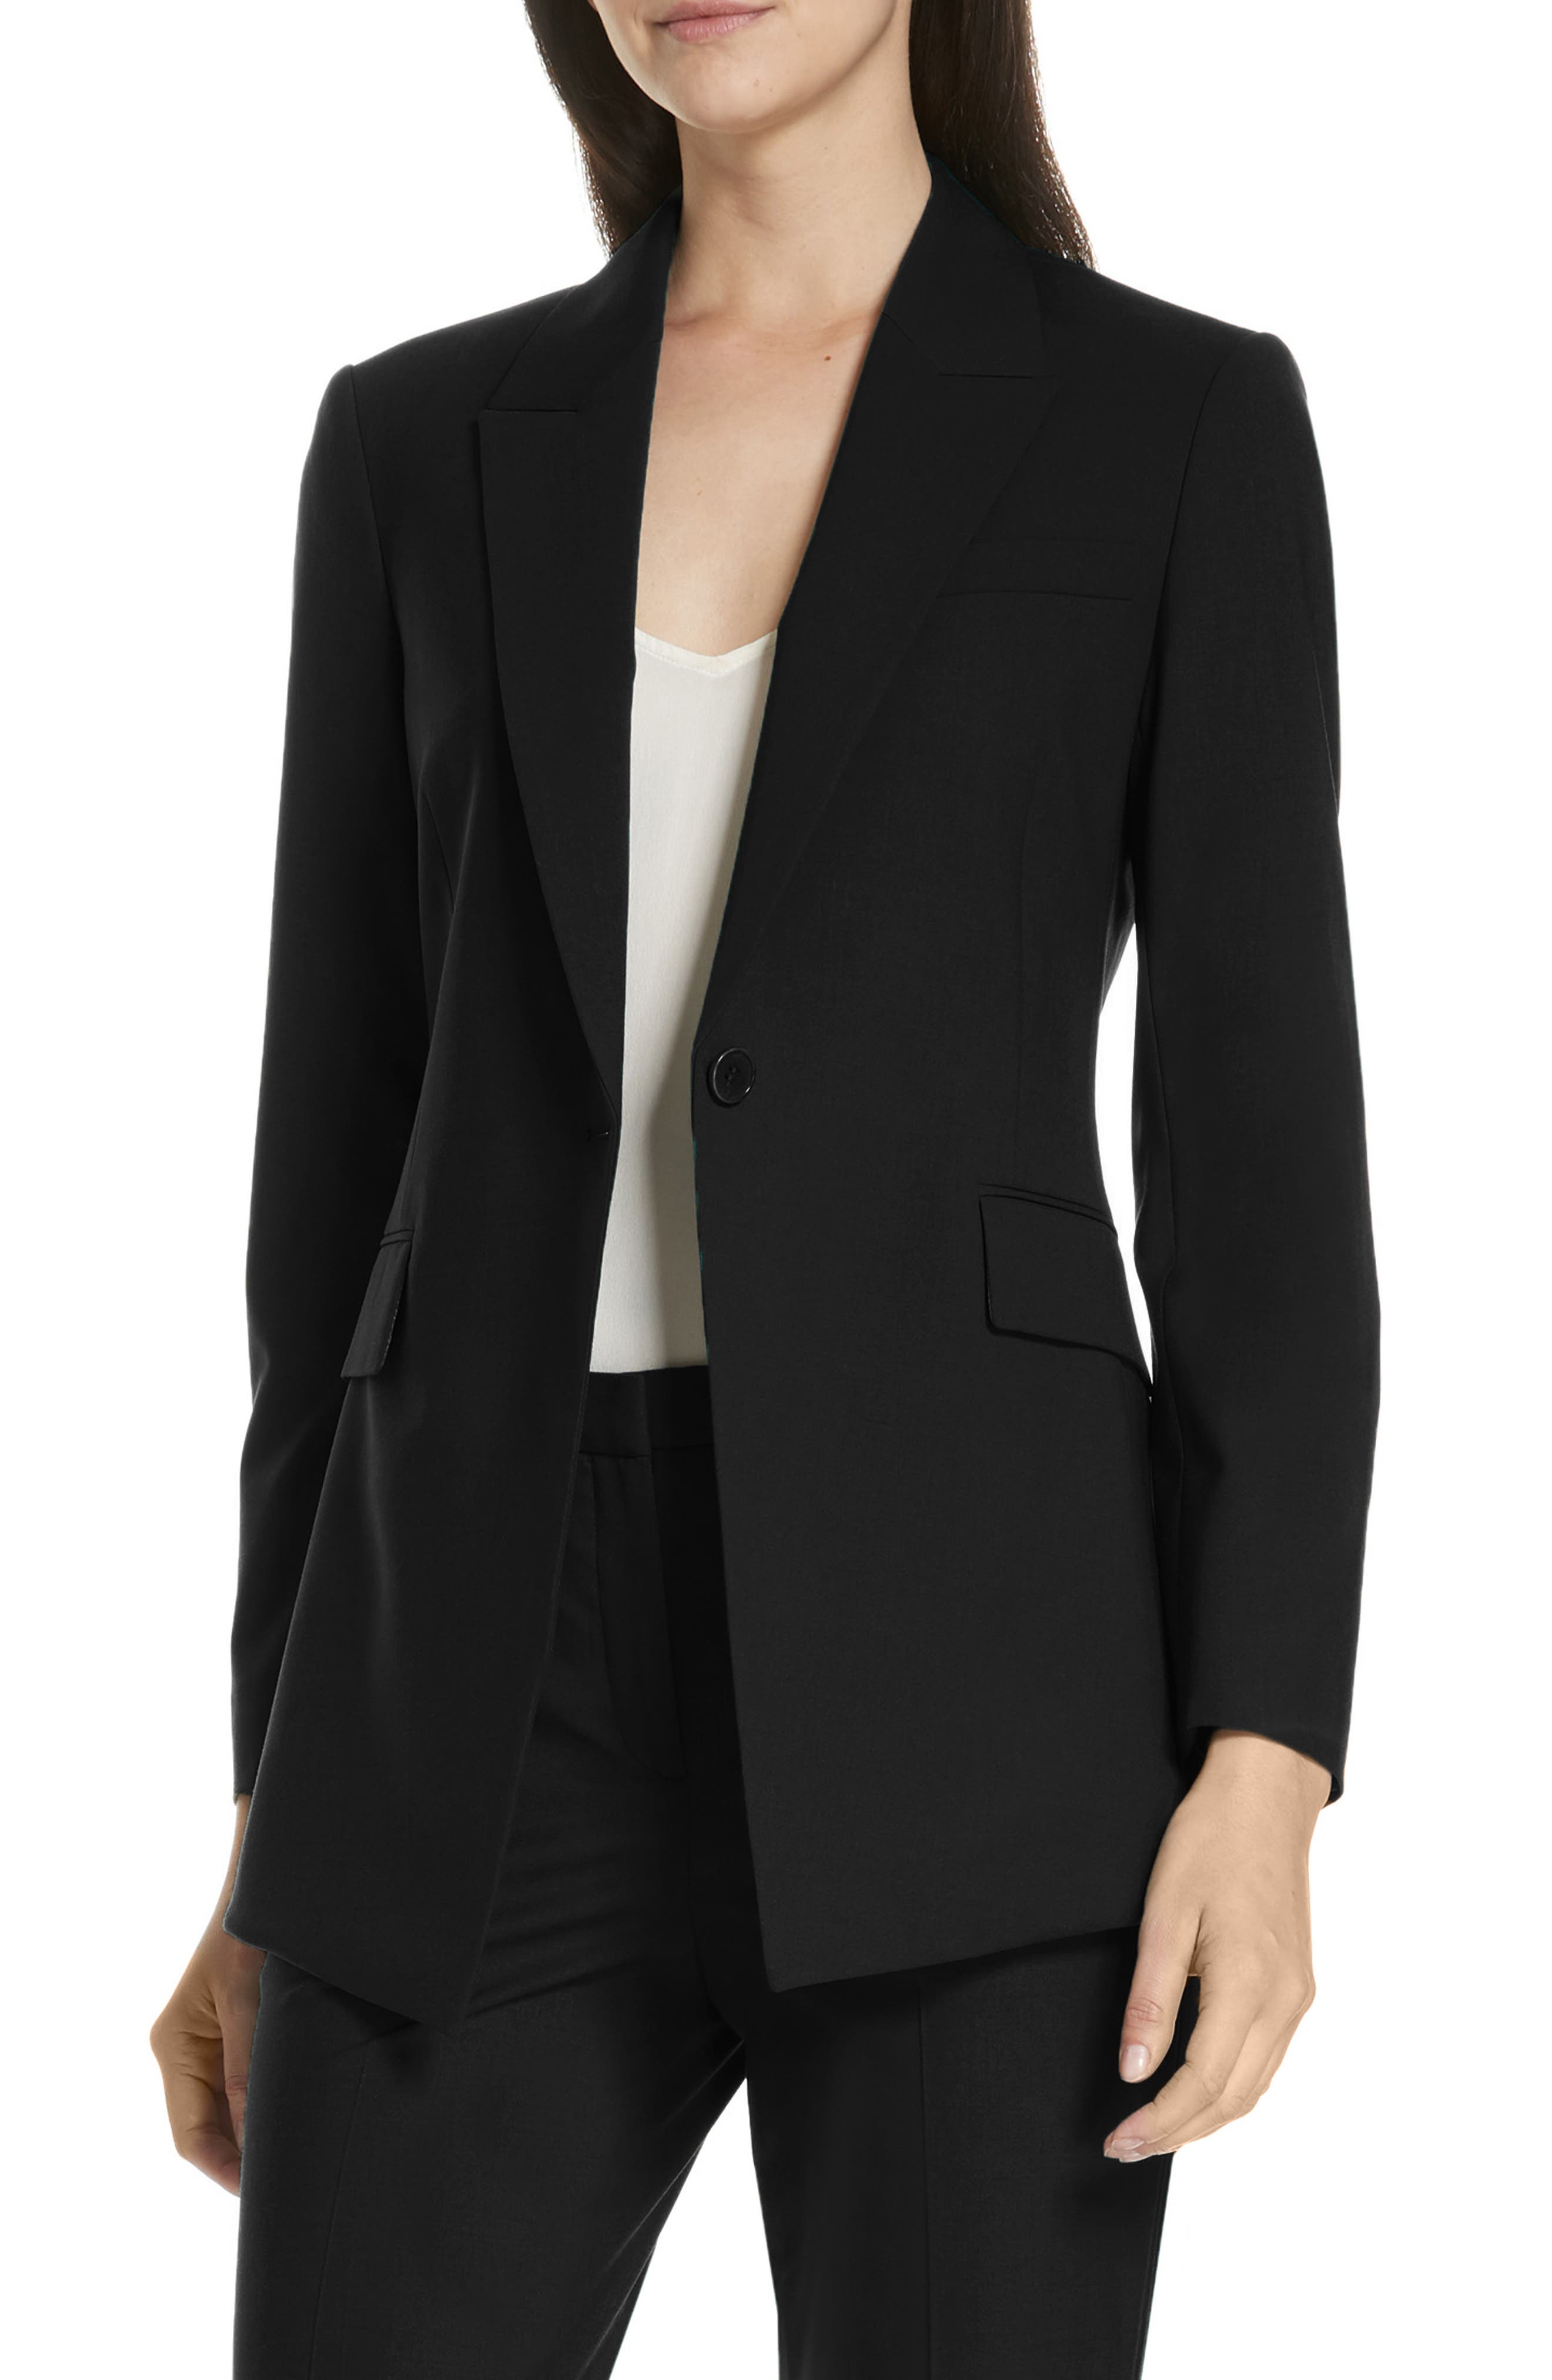 Womens Clothing Suits Hebe Studio Synthetic Suit Jacket in Black 